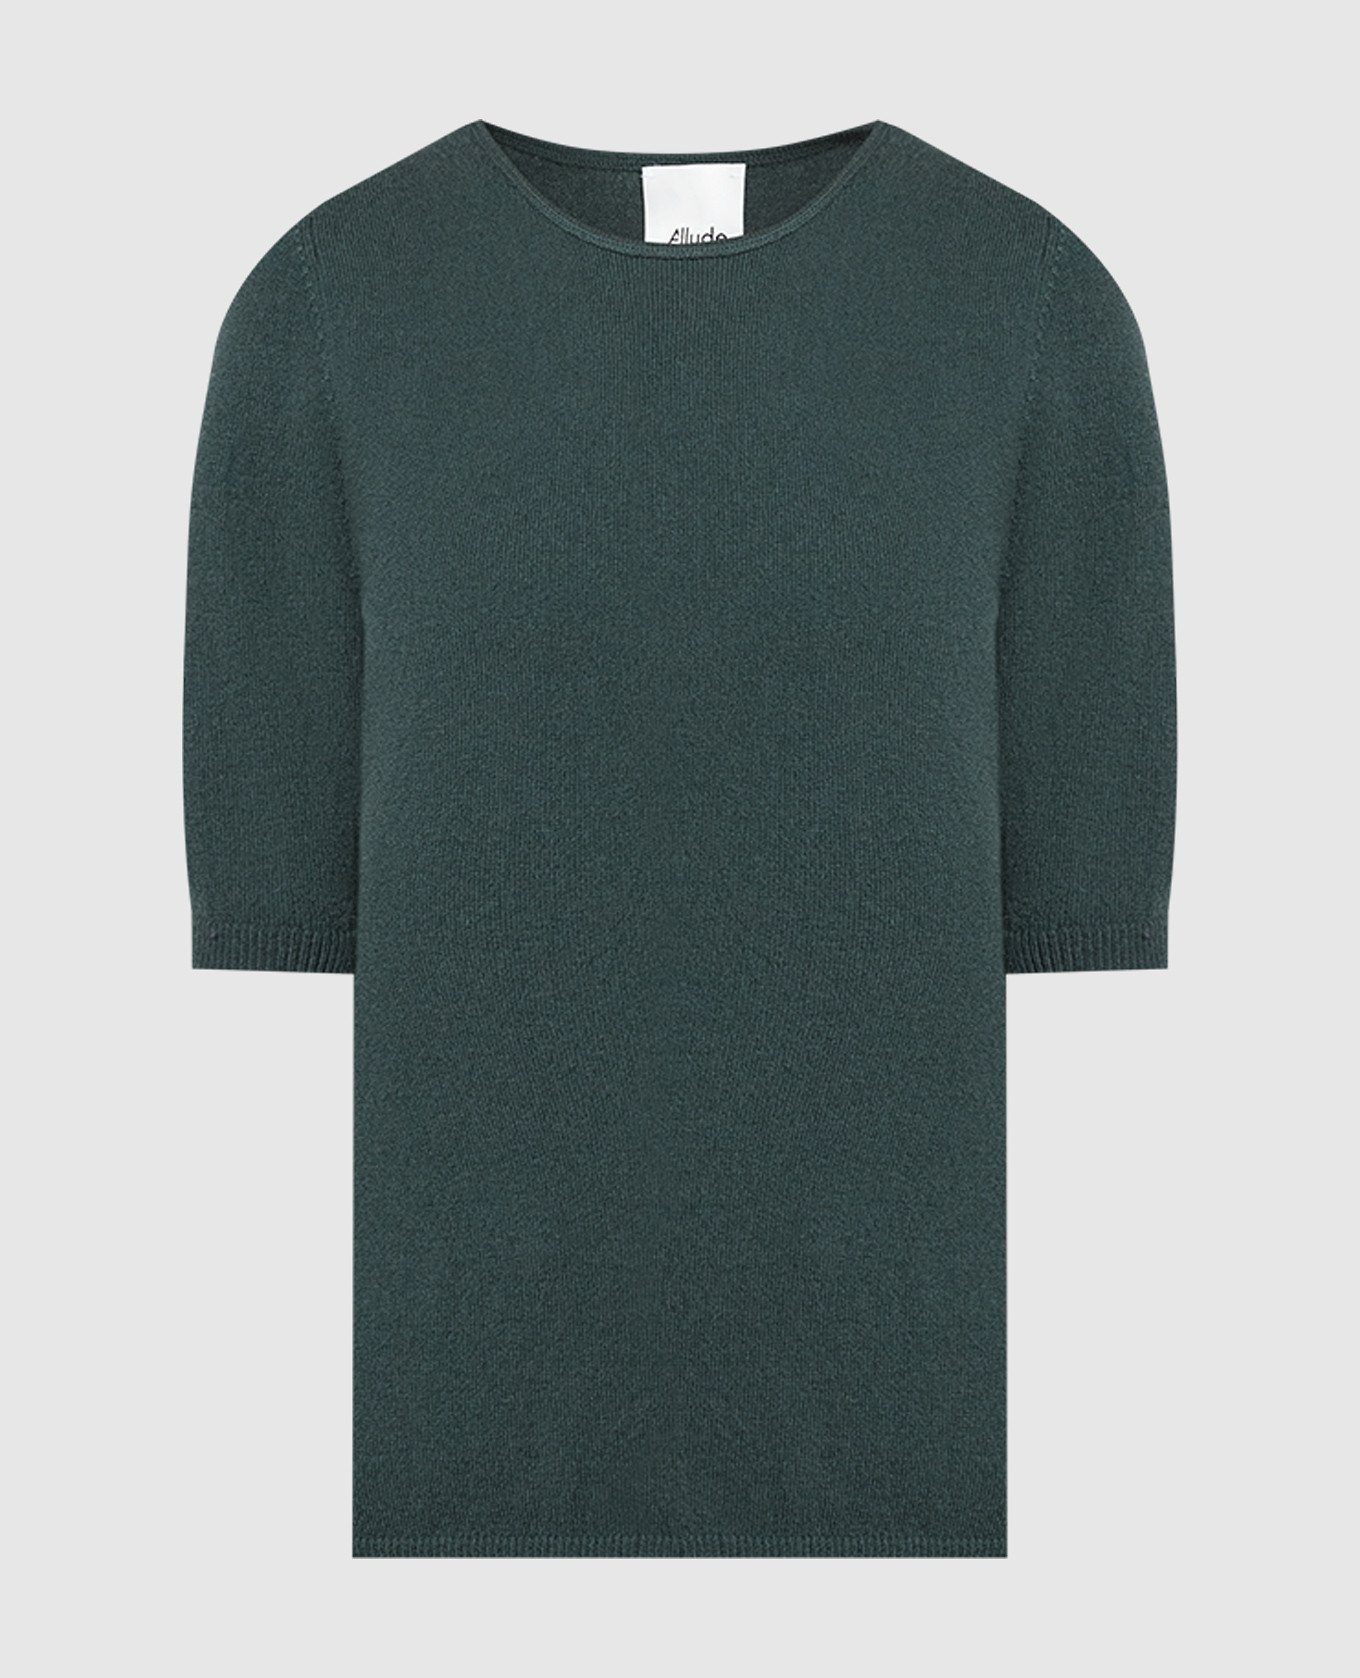 Green wool and cashmere jumper